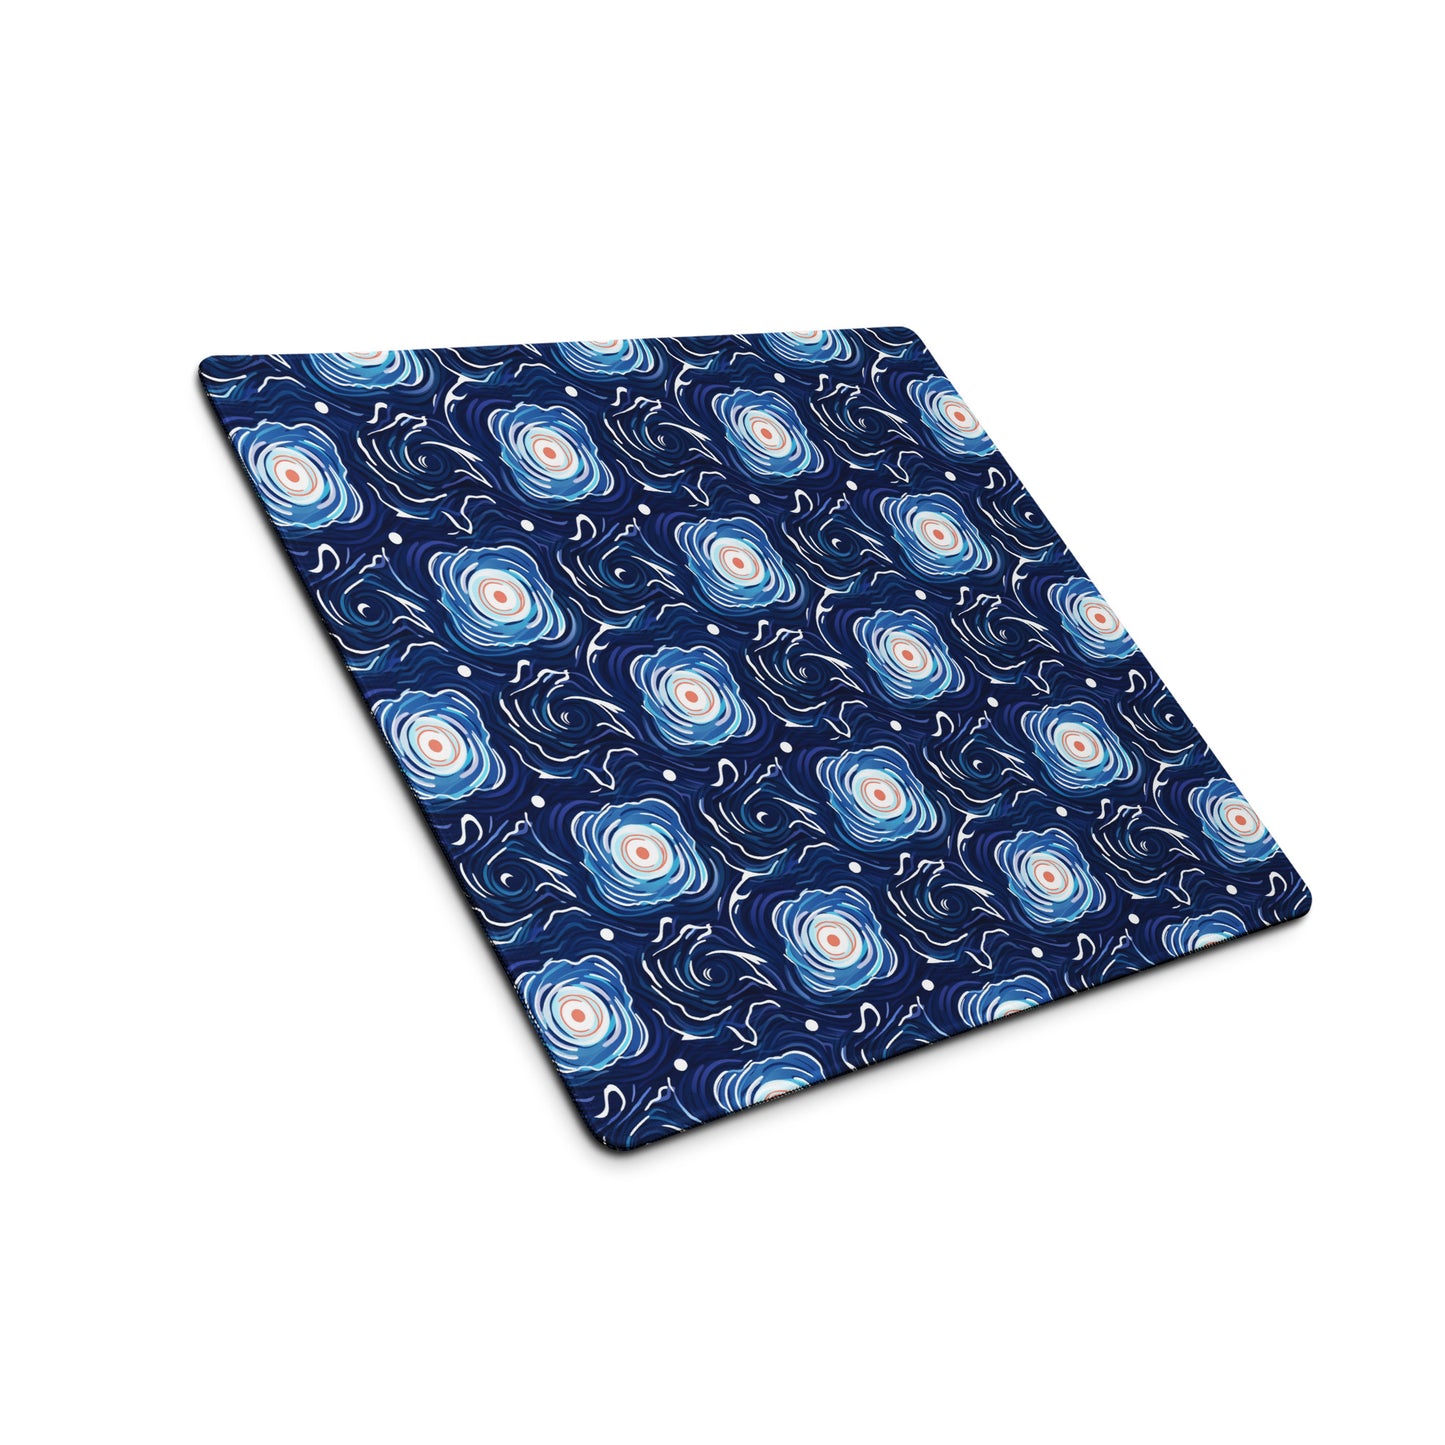 A 18" x 16" desk pad with a blue and white floral pattern sitting at an angle.